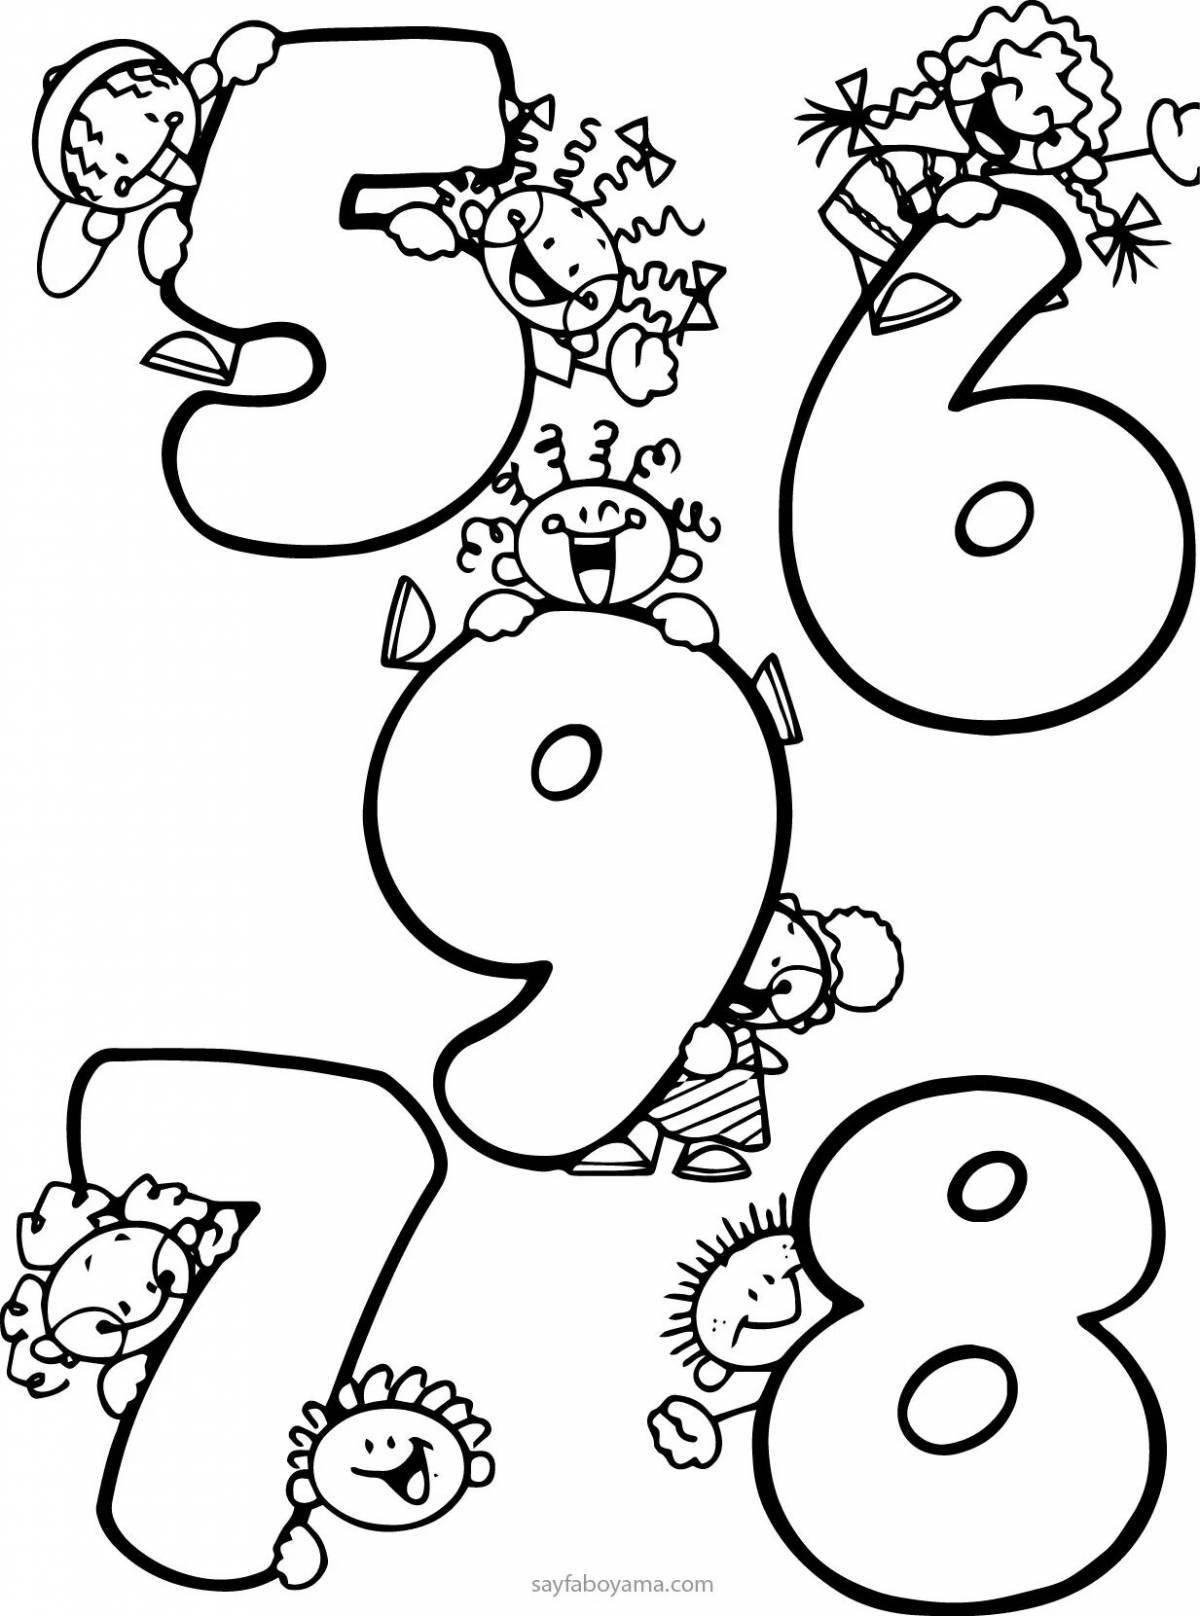 Colored numbers coloring book for kids